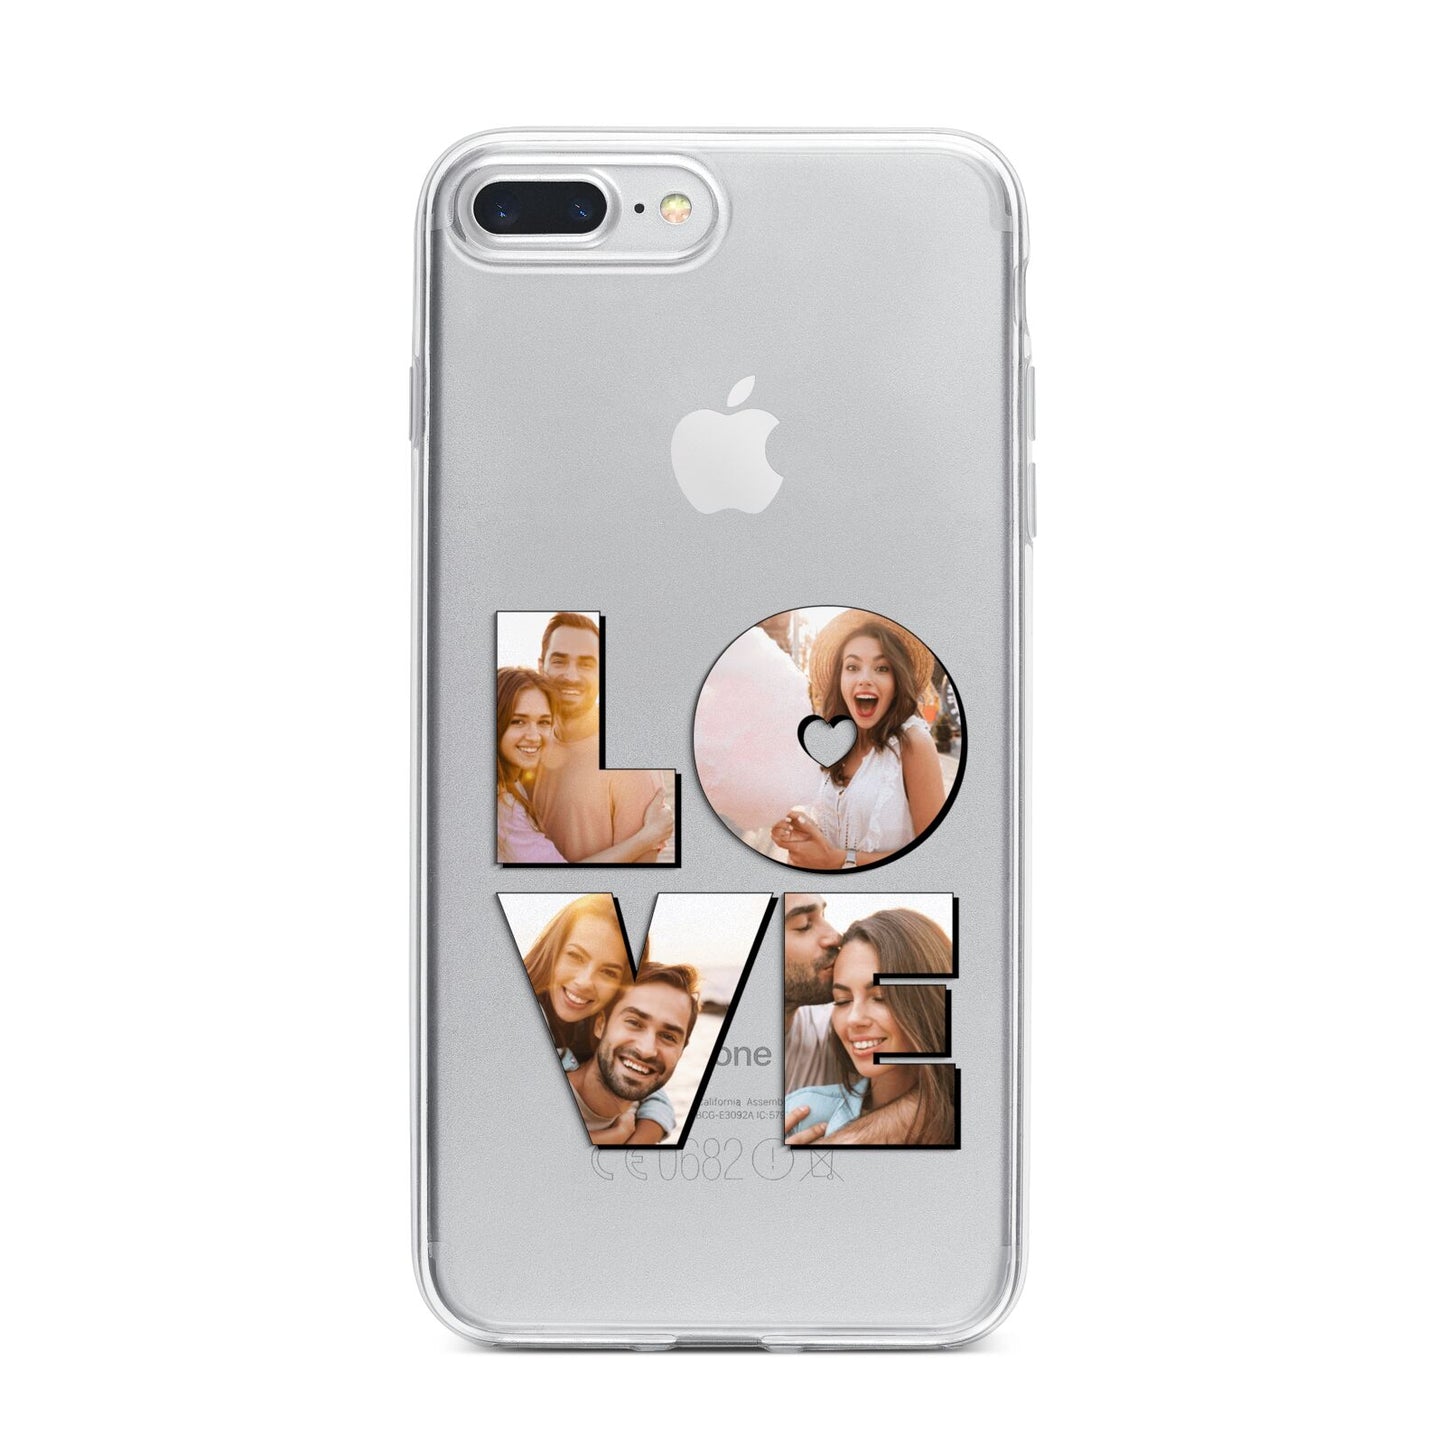 Love Personalised Photo Upload iPhone 7 Plus Bumper Case on Silver iPhone